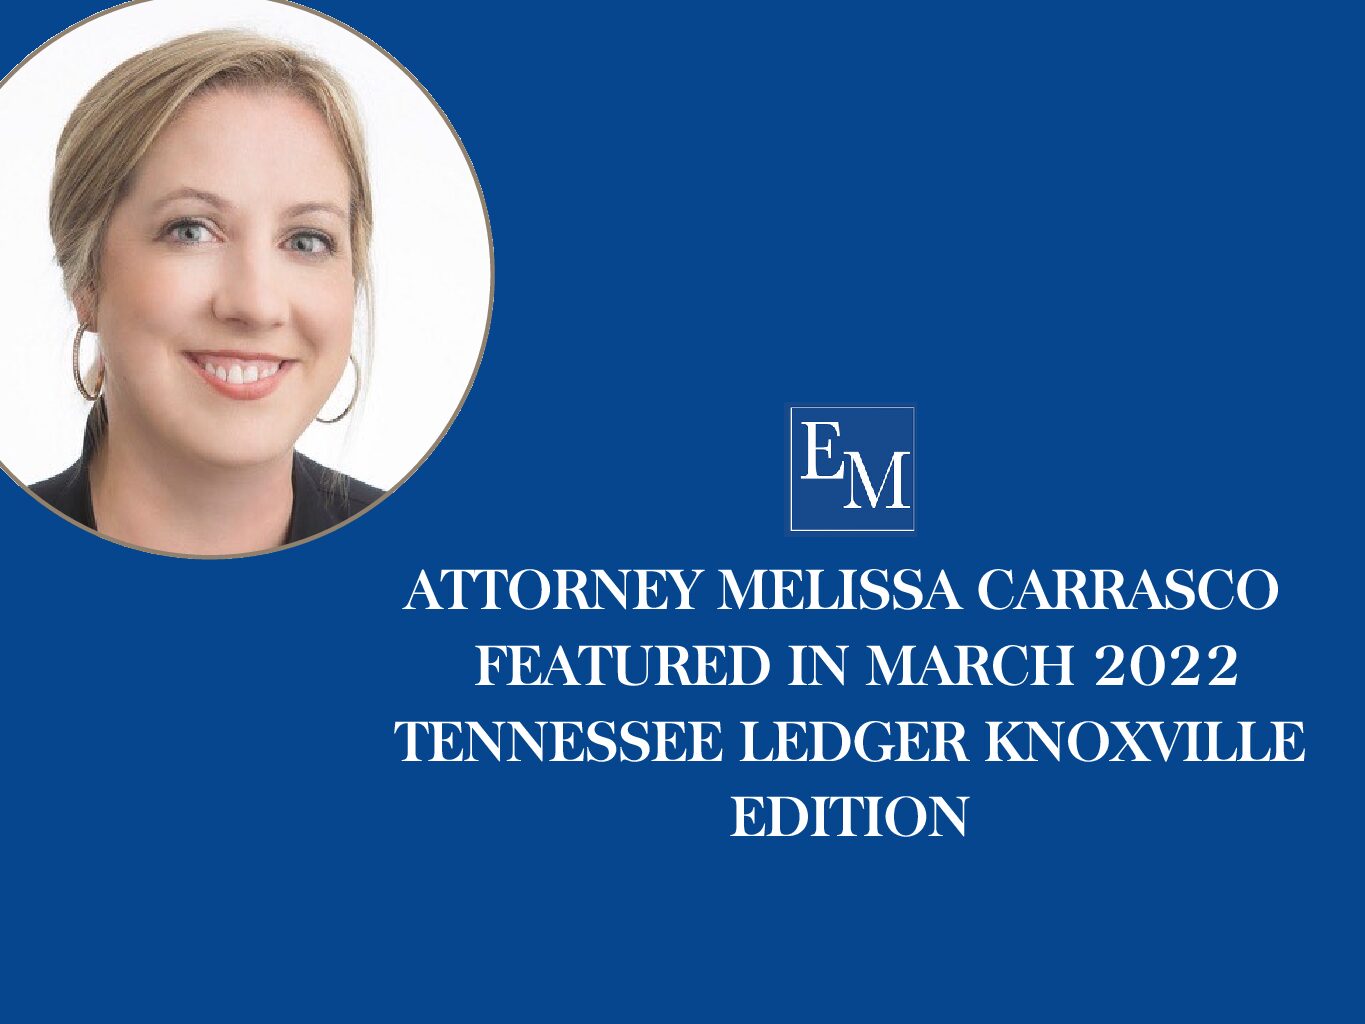 ATTORNEY MELISSA CARRASCO of EGERTON, McAFEE, ARMISTEAD & DAVIS, P.C. FEATURED IN MARCH 2022 TENNESSEE LEDGER KNOXVILLE EDITION